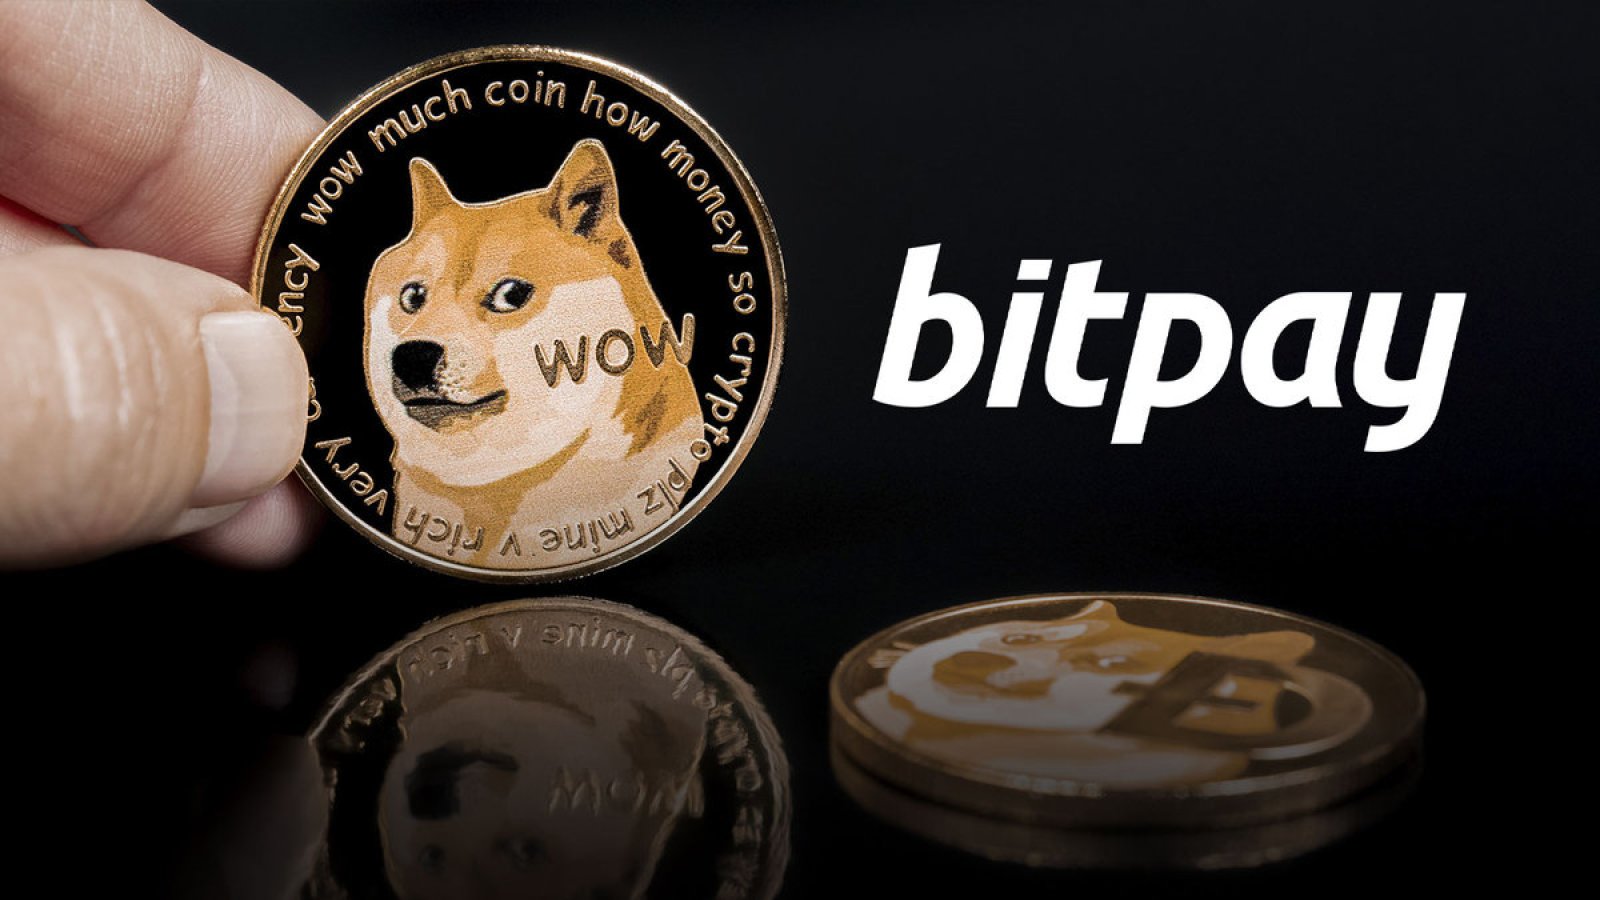 Dogecoin (DOGE) is now the fourth most popular cryptocurrency on BitPay